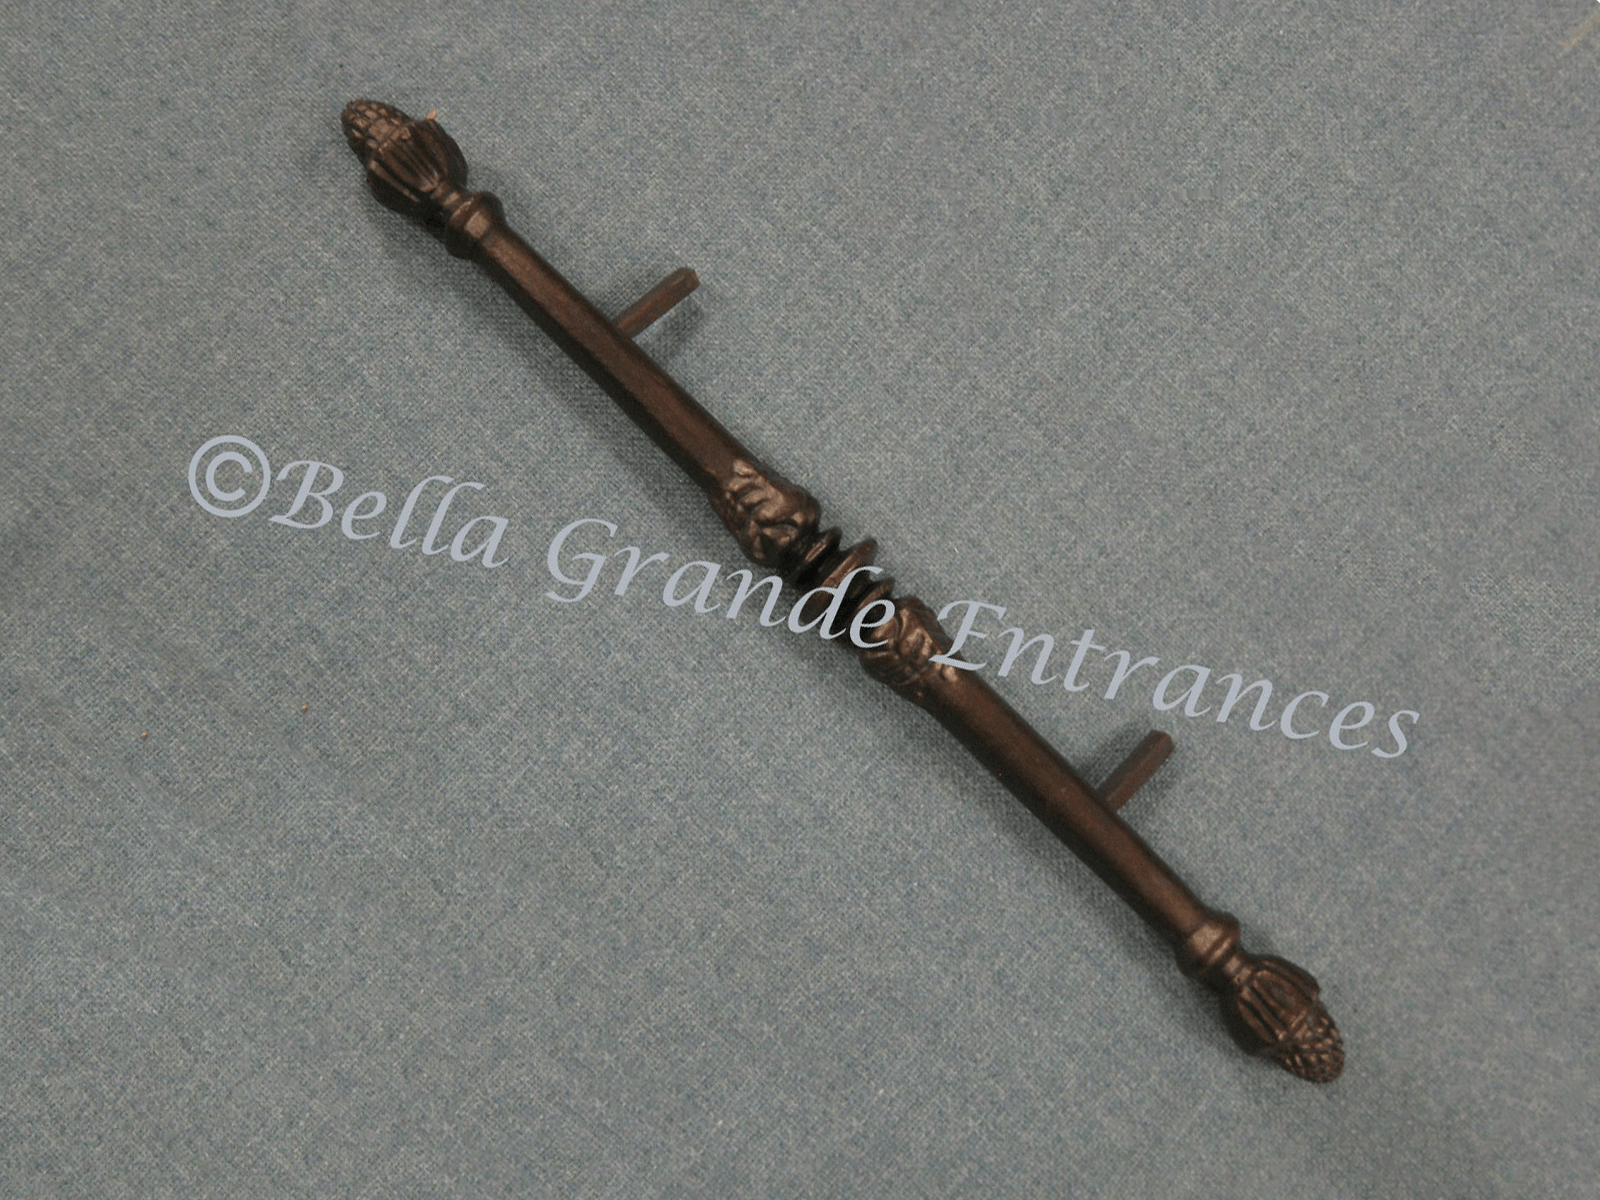 A Acorn Pull handle 45 degree rotate image on a grey cloth surface